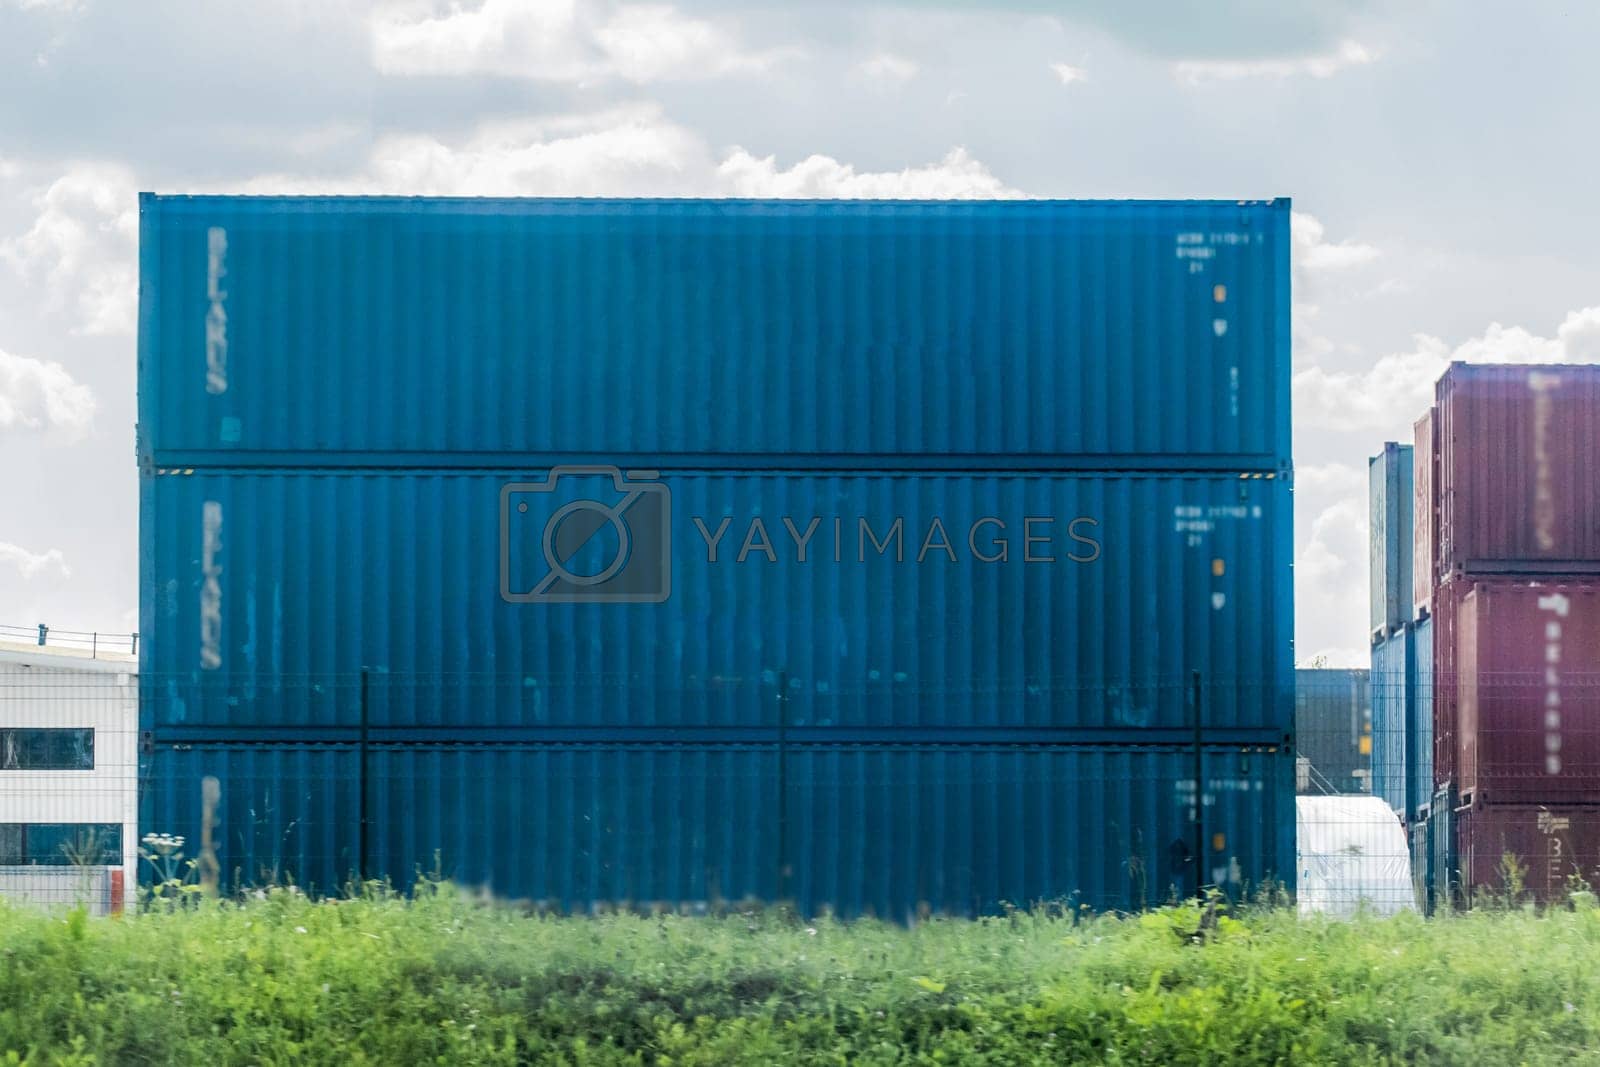 Royalty free image of Freight cargo container transportation delivery shipping transport transit by AYDO8